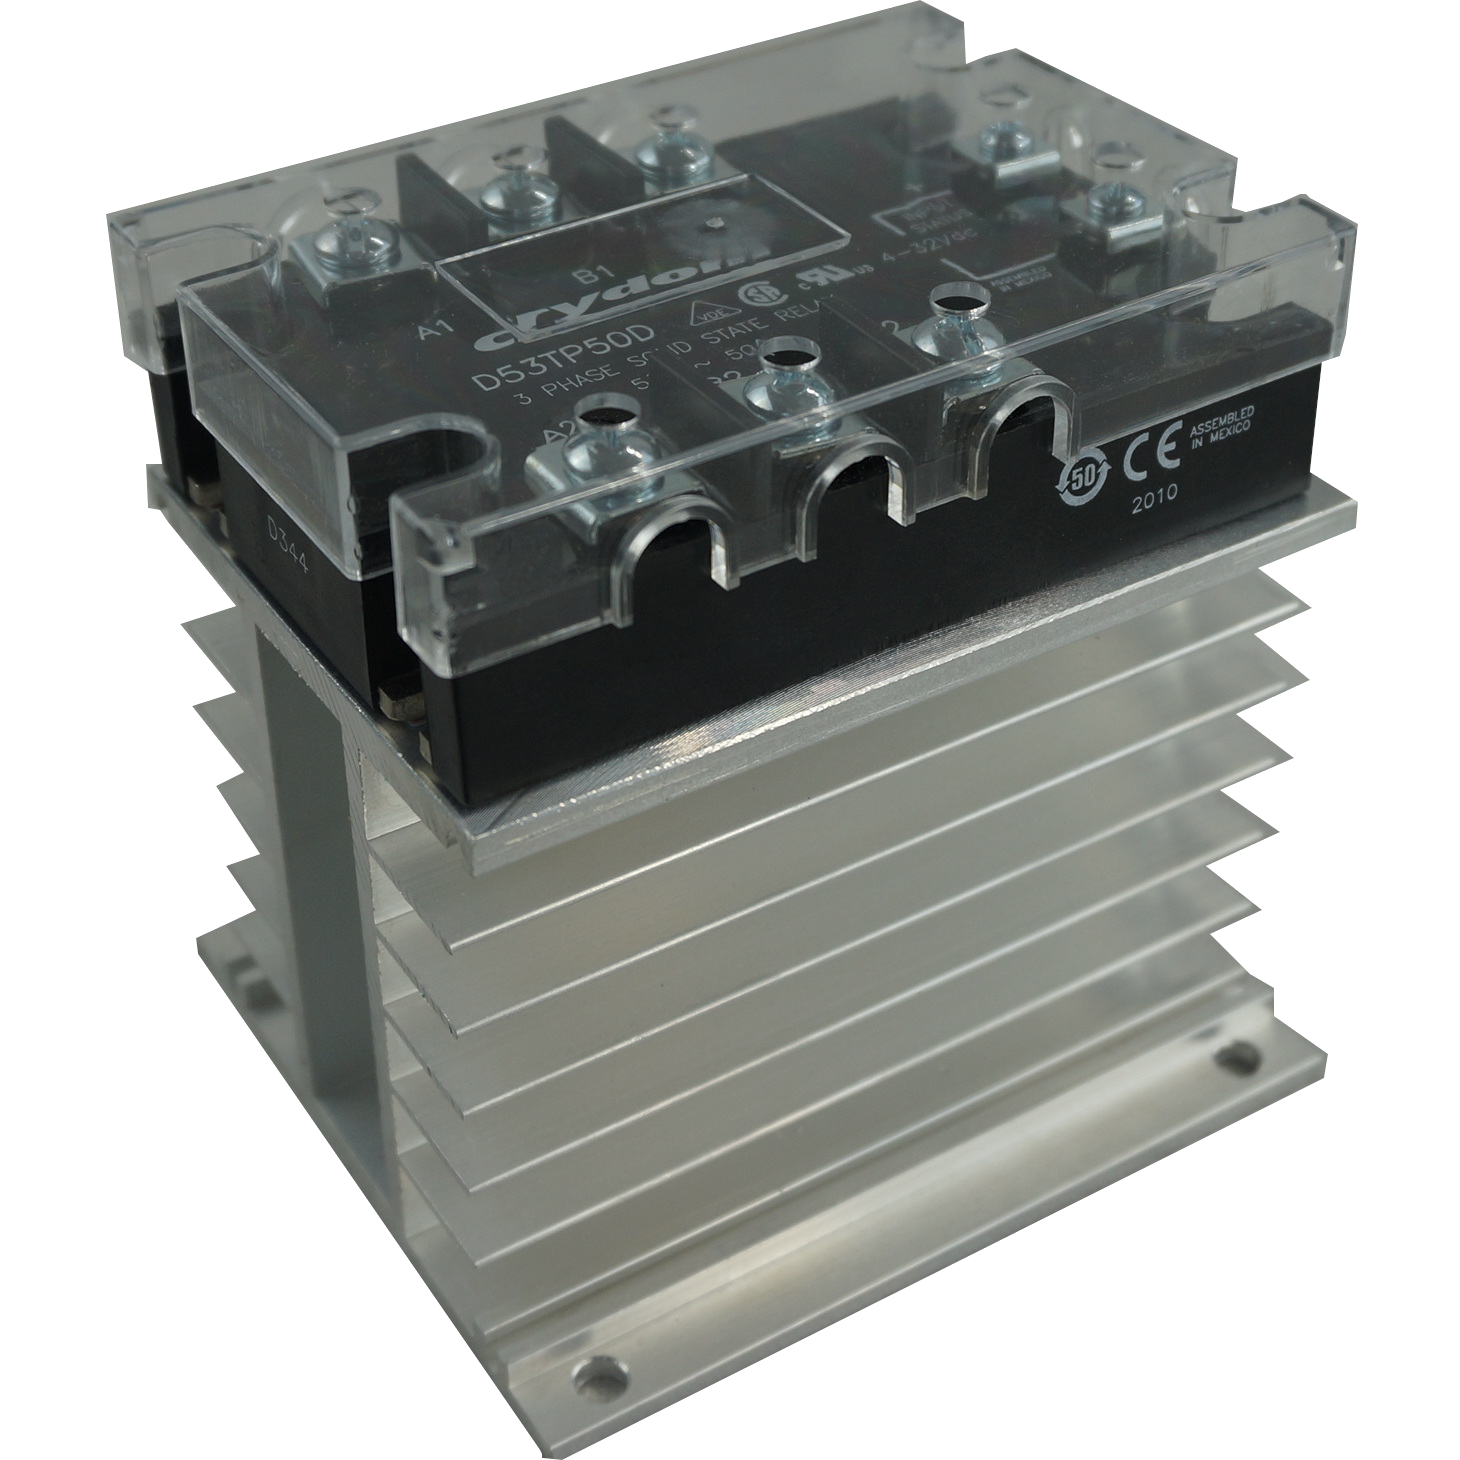 A53TP50D + HS212DR, Solid State Relay, and Heatsink Assembly, 3 Phase 90-280VAC Control, 20 Amp per phase @ 40 Deg C, 48-530VAC Load, LED Status Indicator